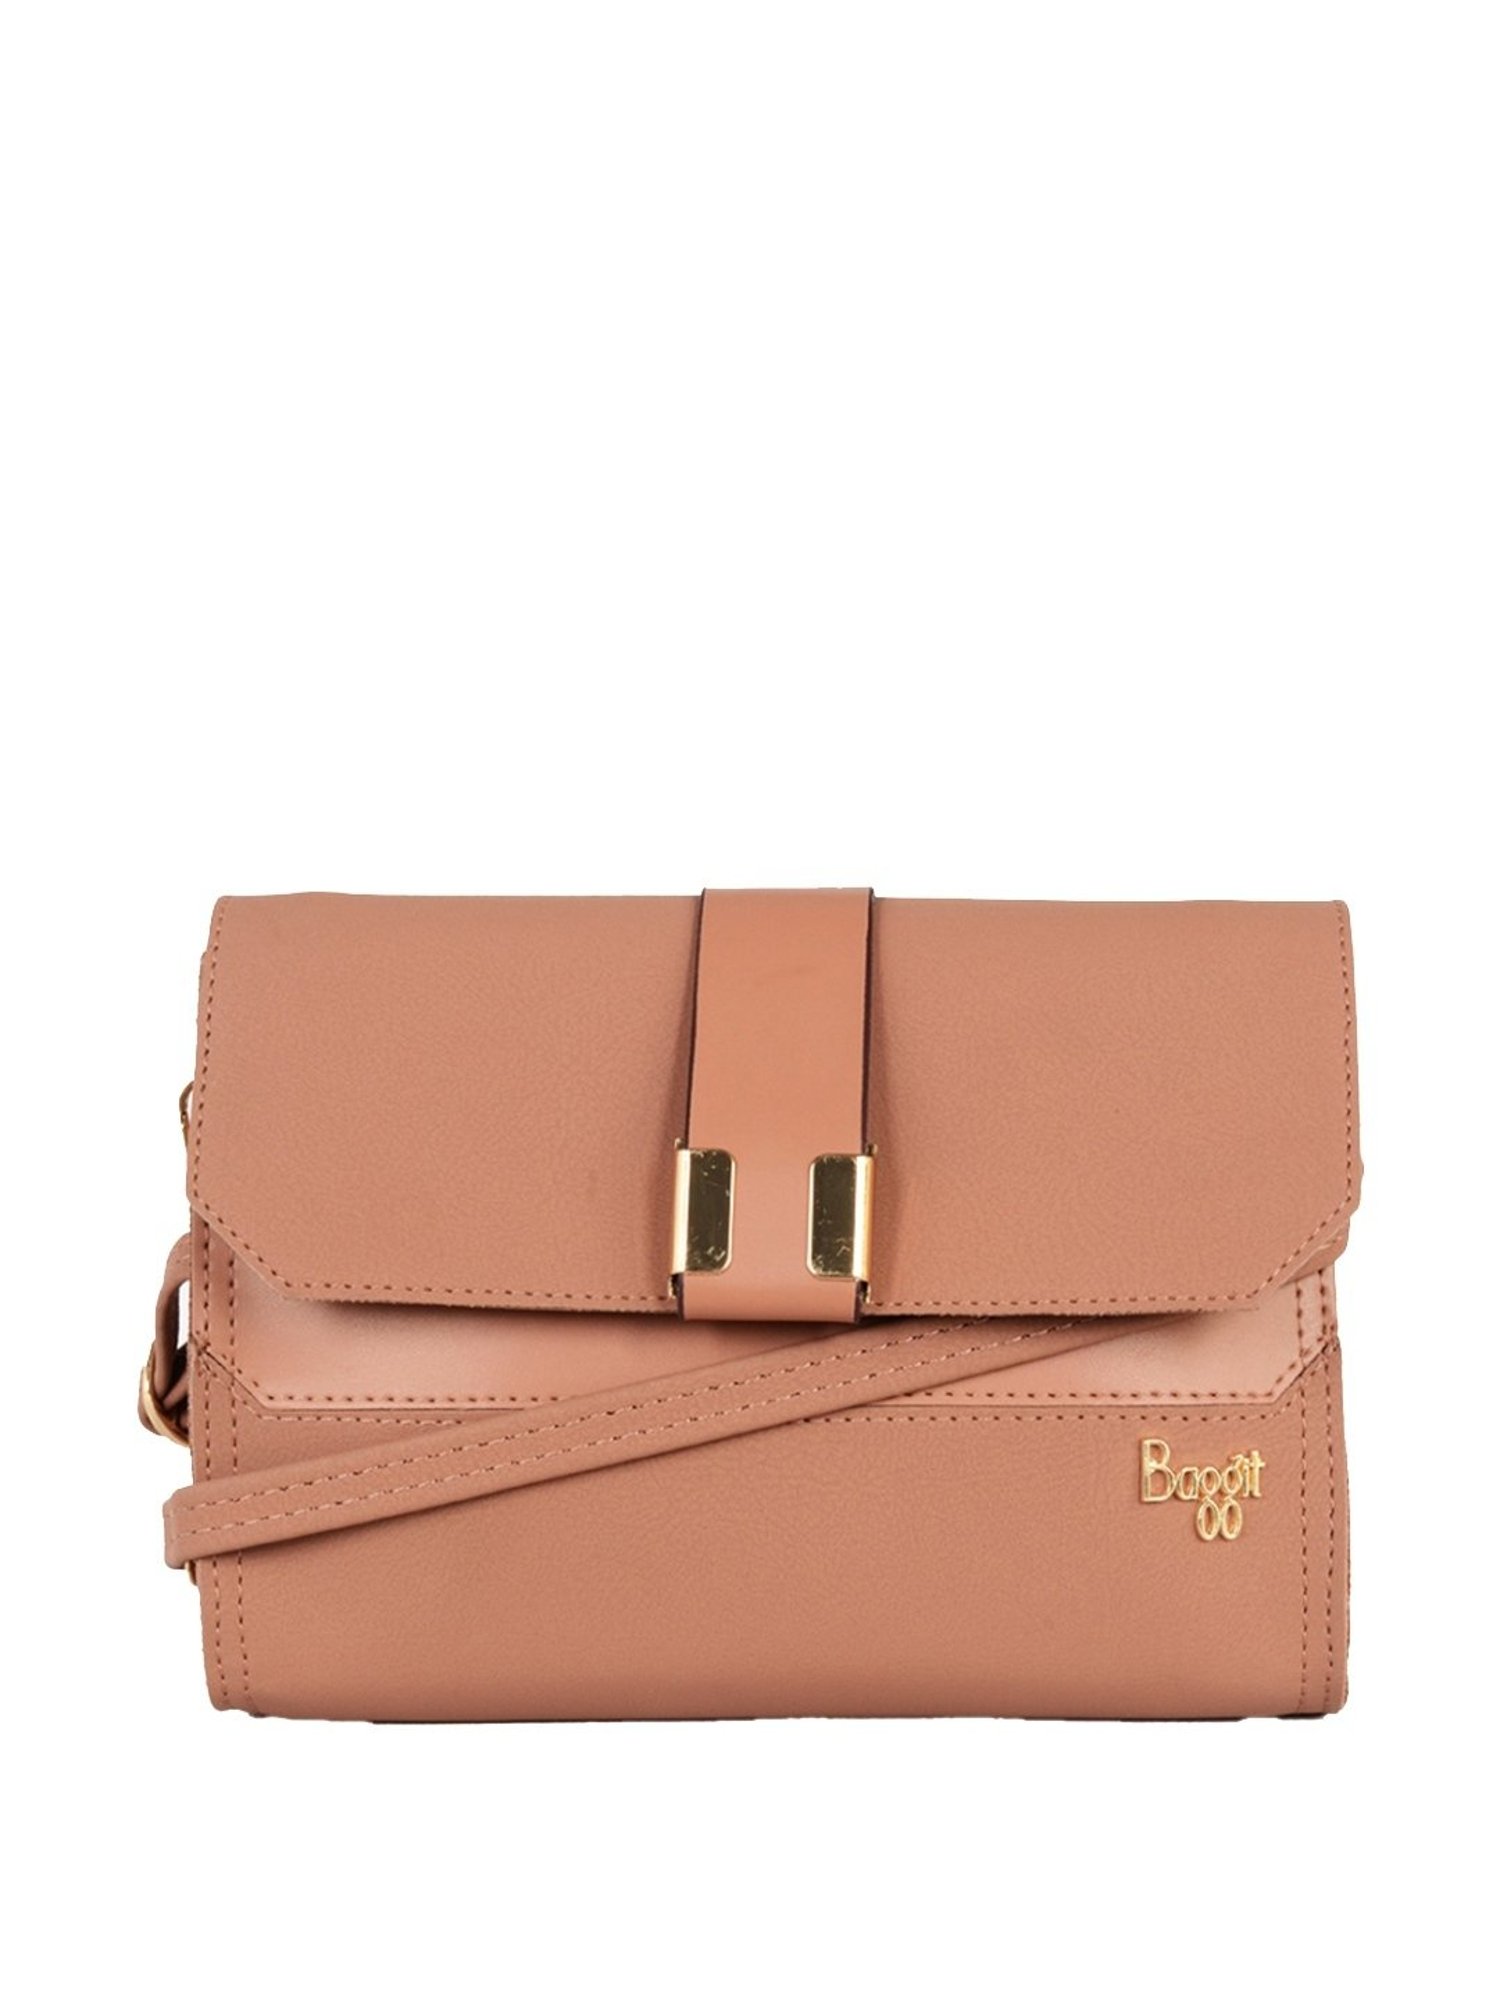 Designer PU Leather Crossbody Bag With Gold Hardware Luxury Womens Baggit  Handbags For Fashionable Shopping And Shoulder Chain Strap From  Bagwallet888, $29.92 | DHgate.Com